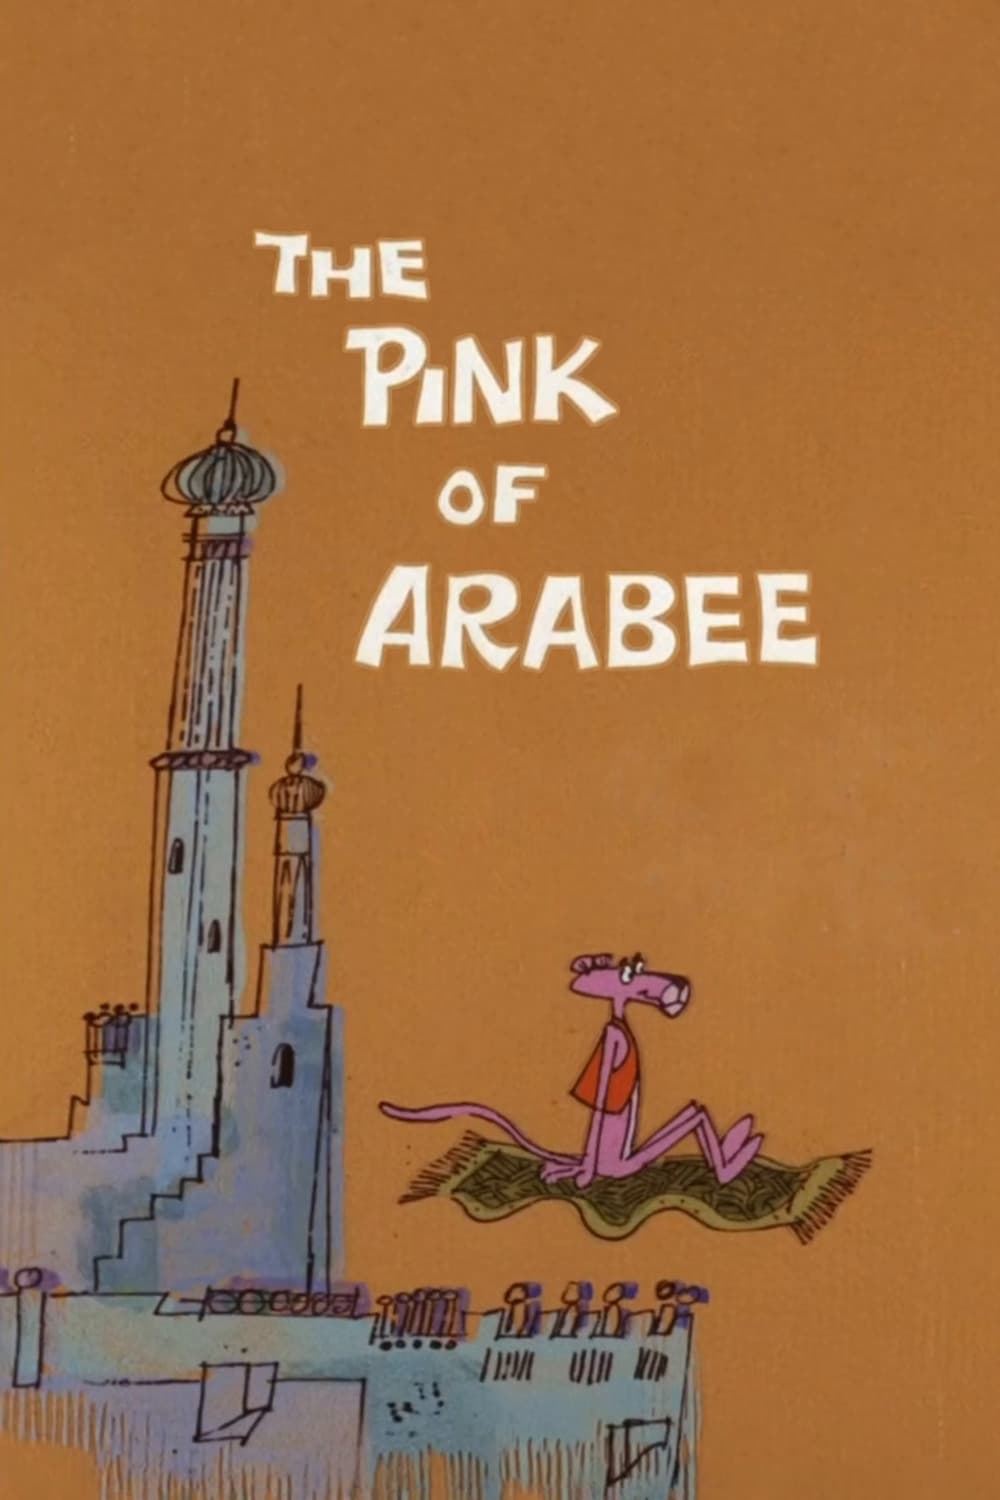 The Pink of Arabee (1976)